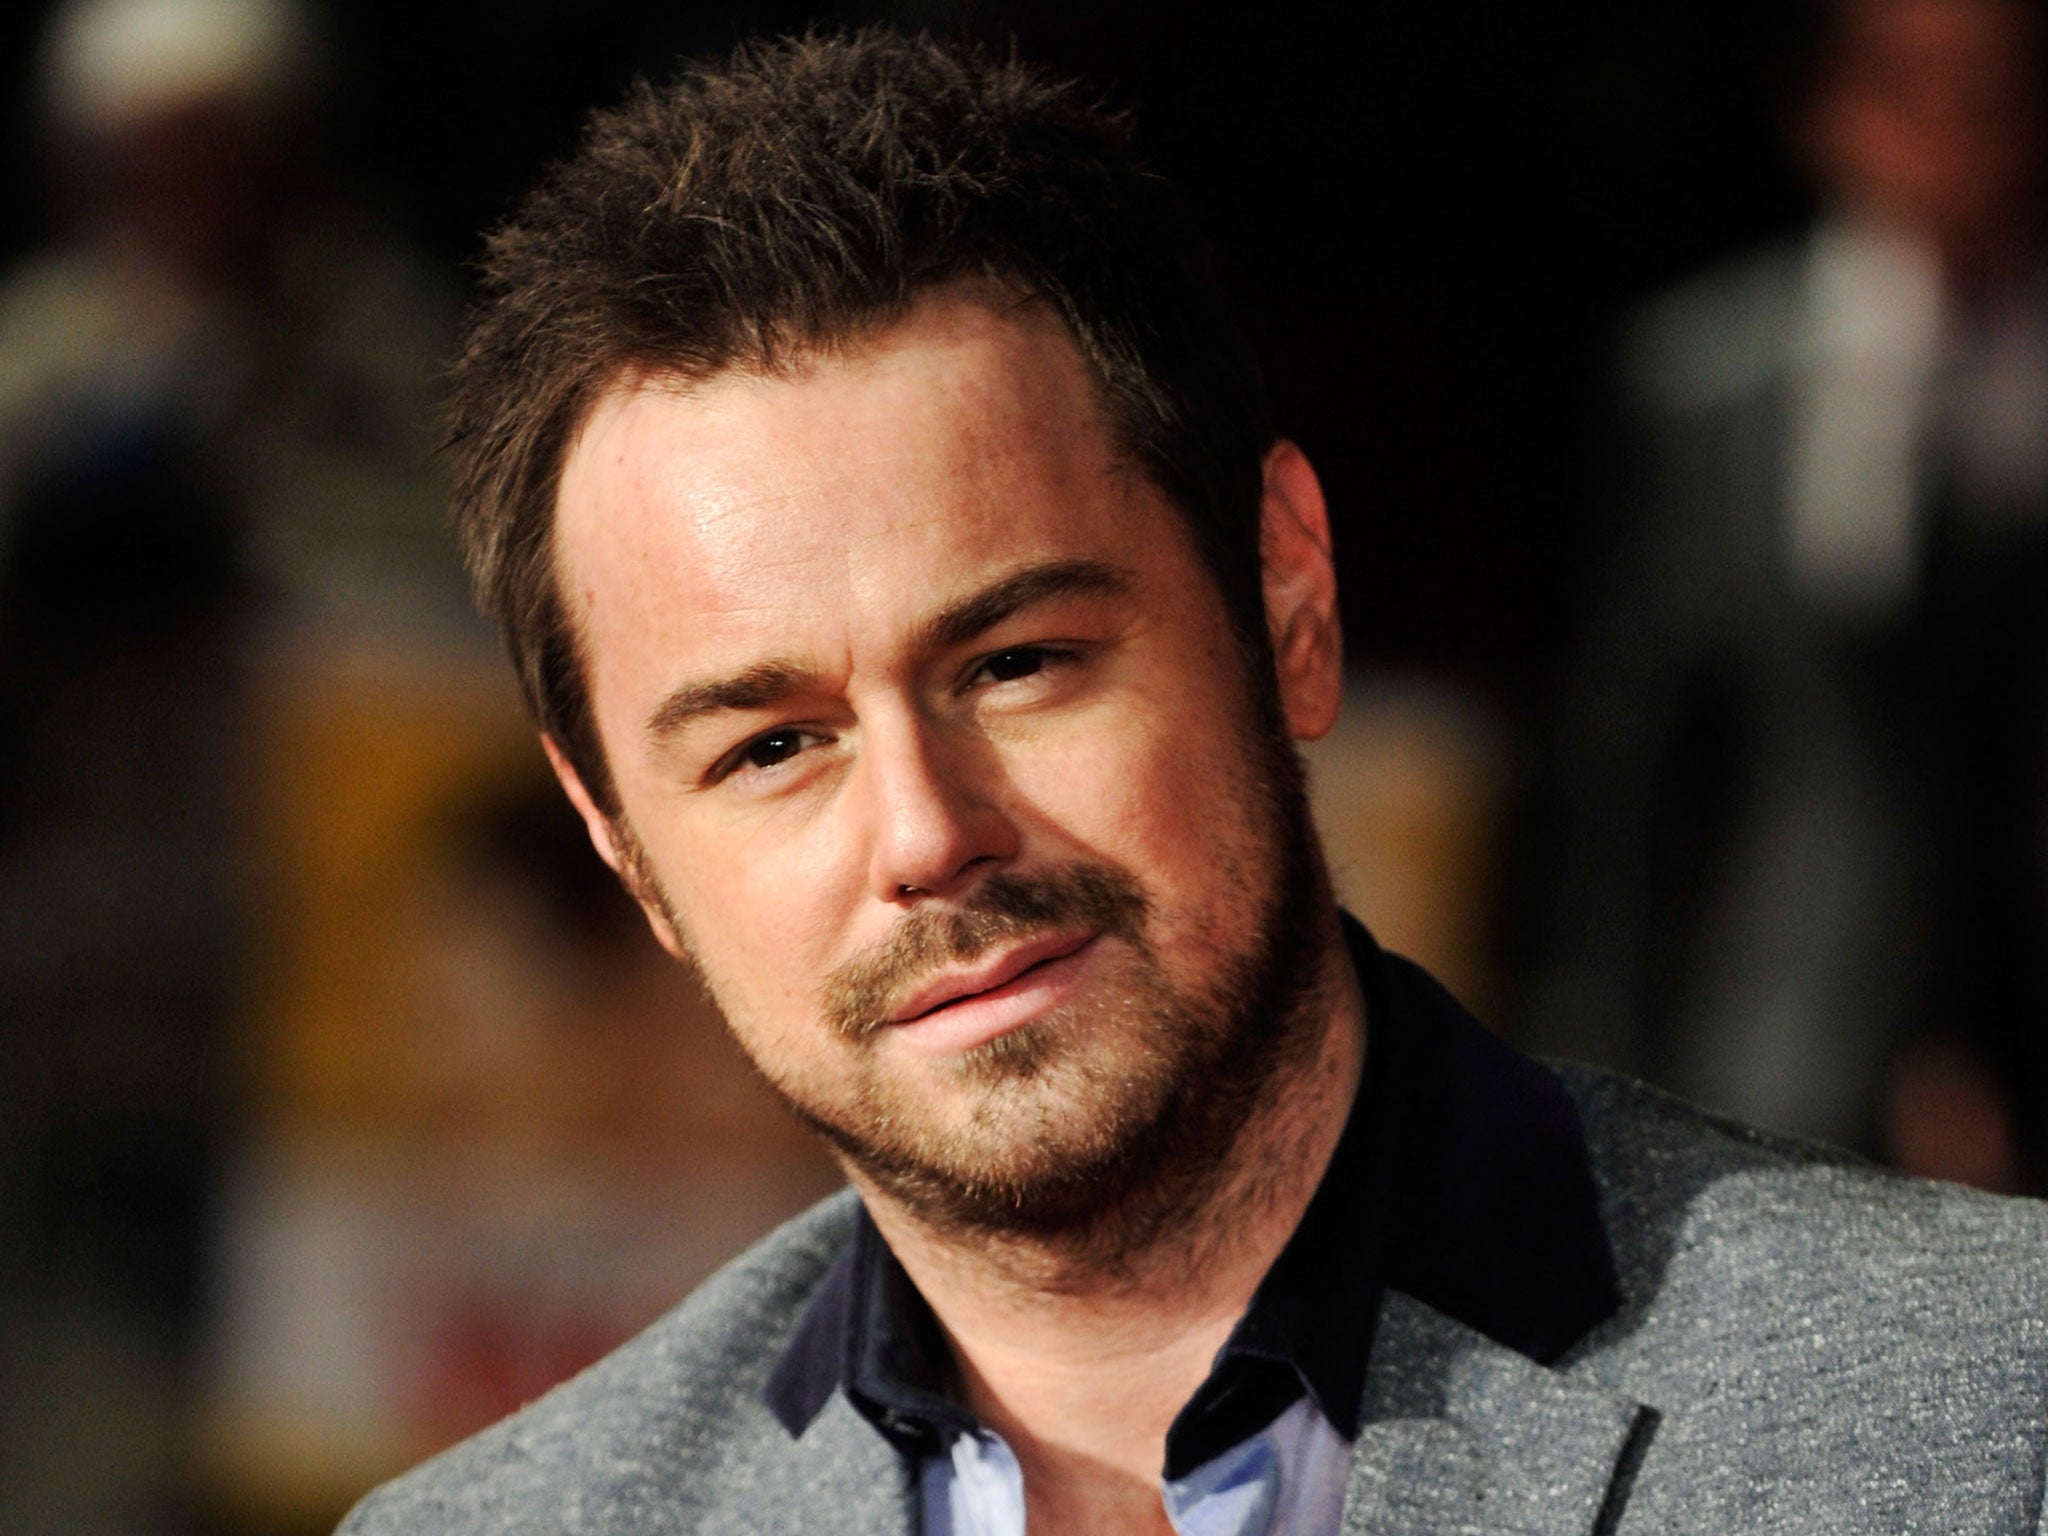 Ed Miliband tried to impress EastEnders actor Danny Dyer with his knowledge of the show